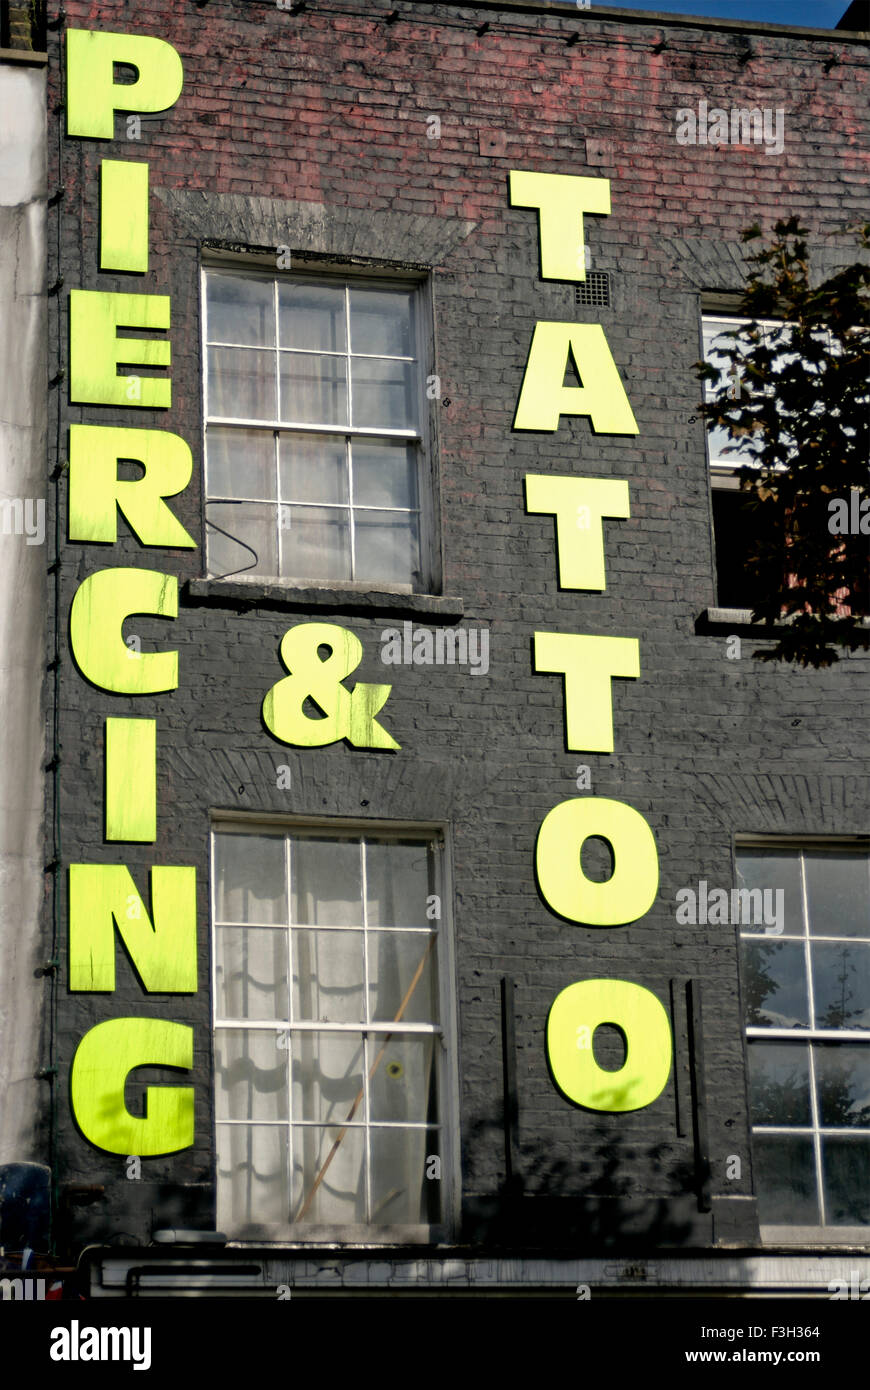 Piercing and Tattoo shop, Camden Town, Londres, Angleterre, Royaume-Uni, ROYAUME-UNI Banque D'Images